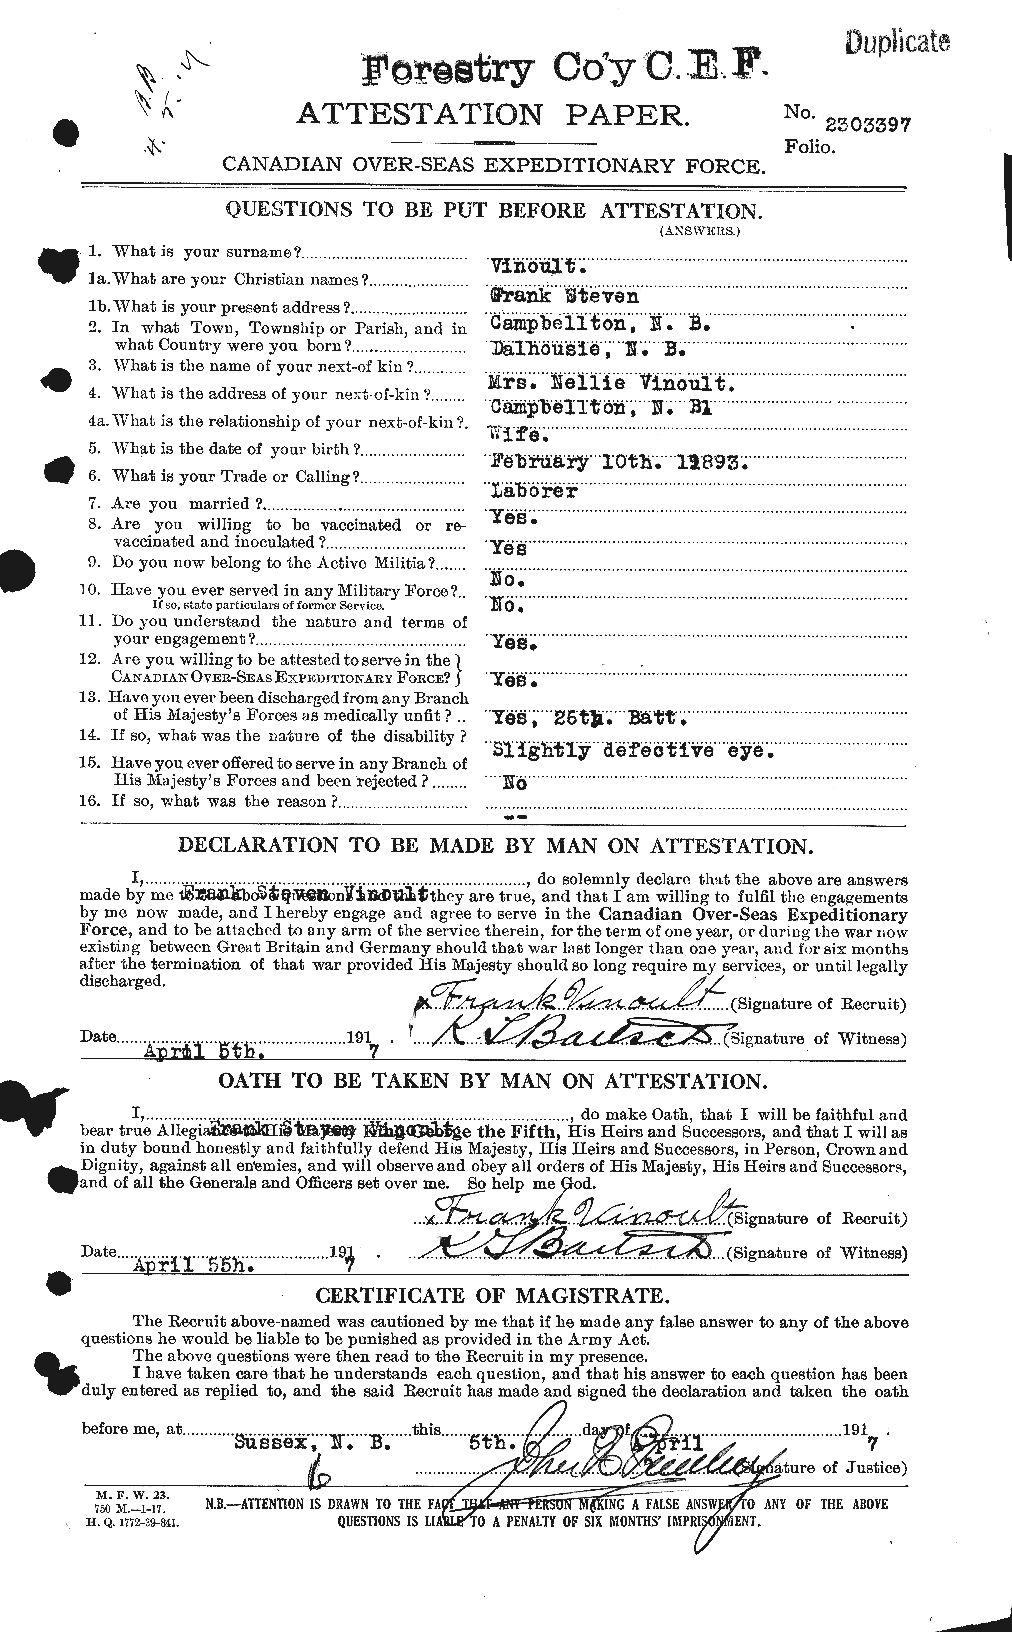 Personnel Records of the First World War - CEF 648669a